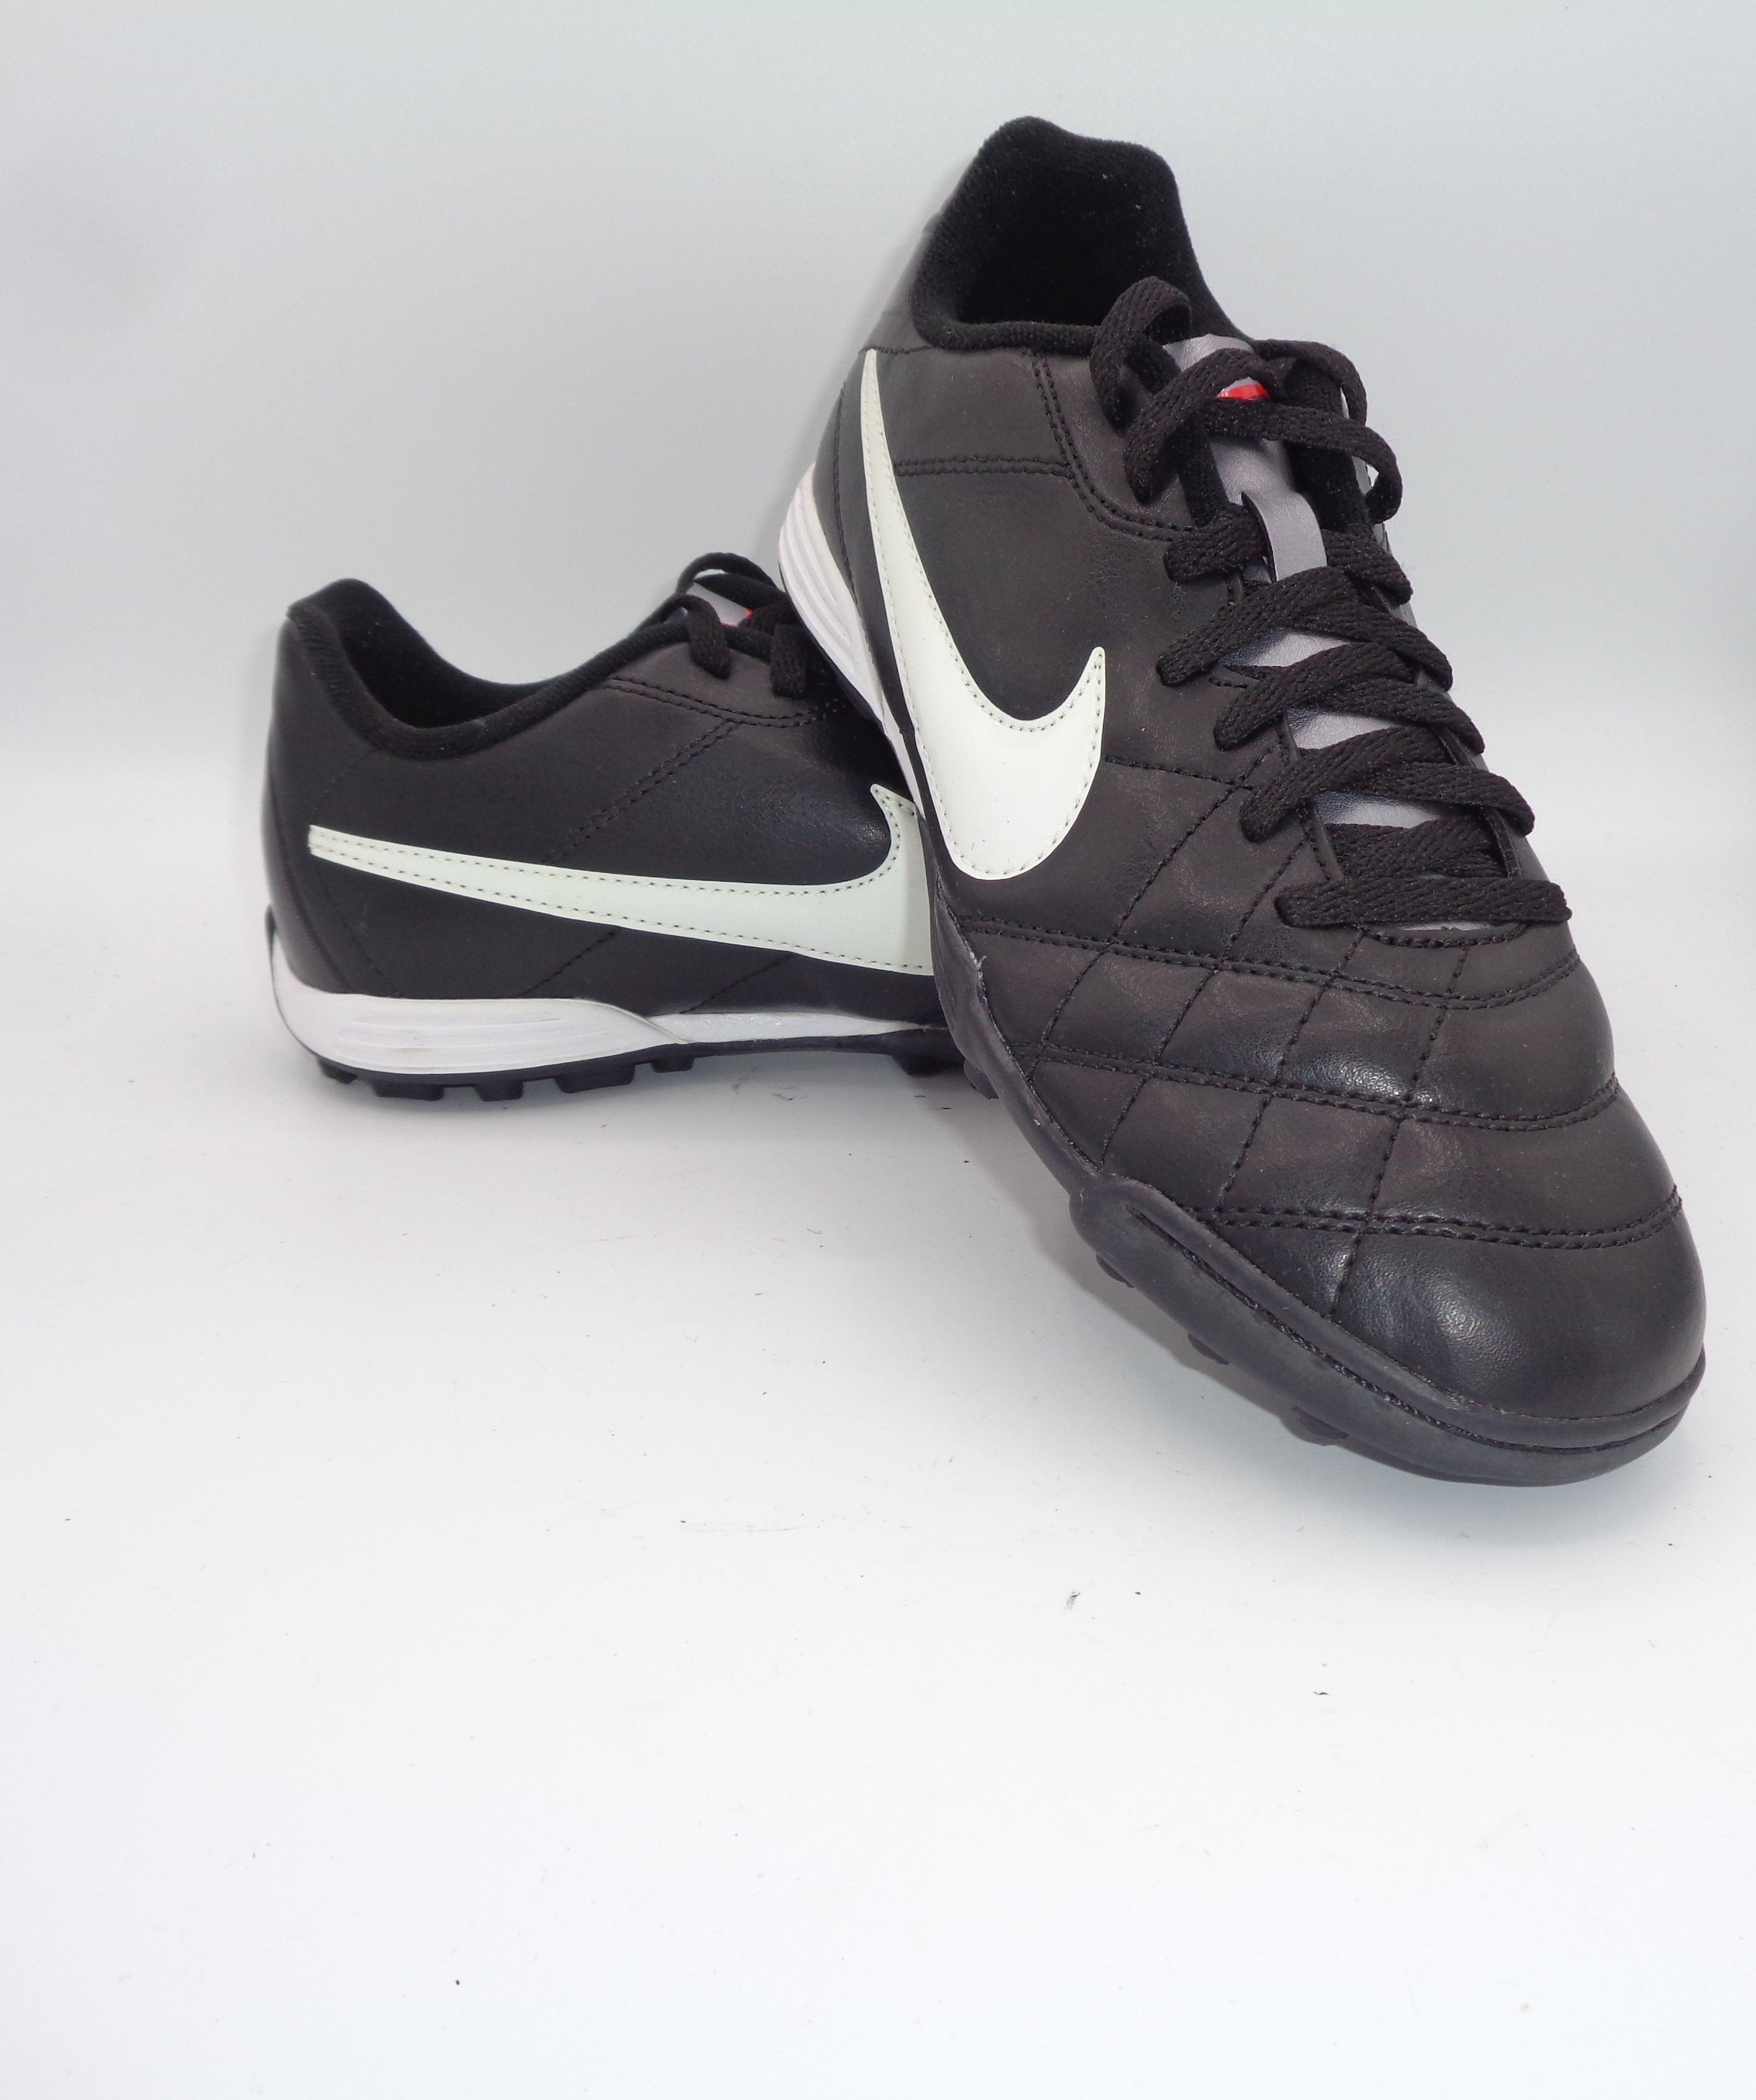 NIKE TIEMPO NATURAL III ASTRO FOOTBALL BOOTS - NIKE - SIZE 5.5